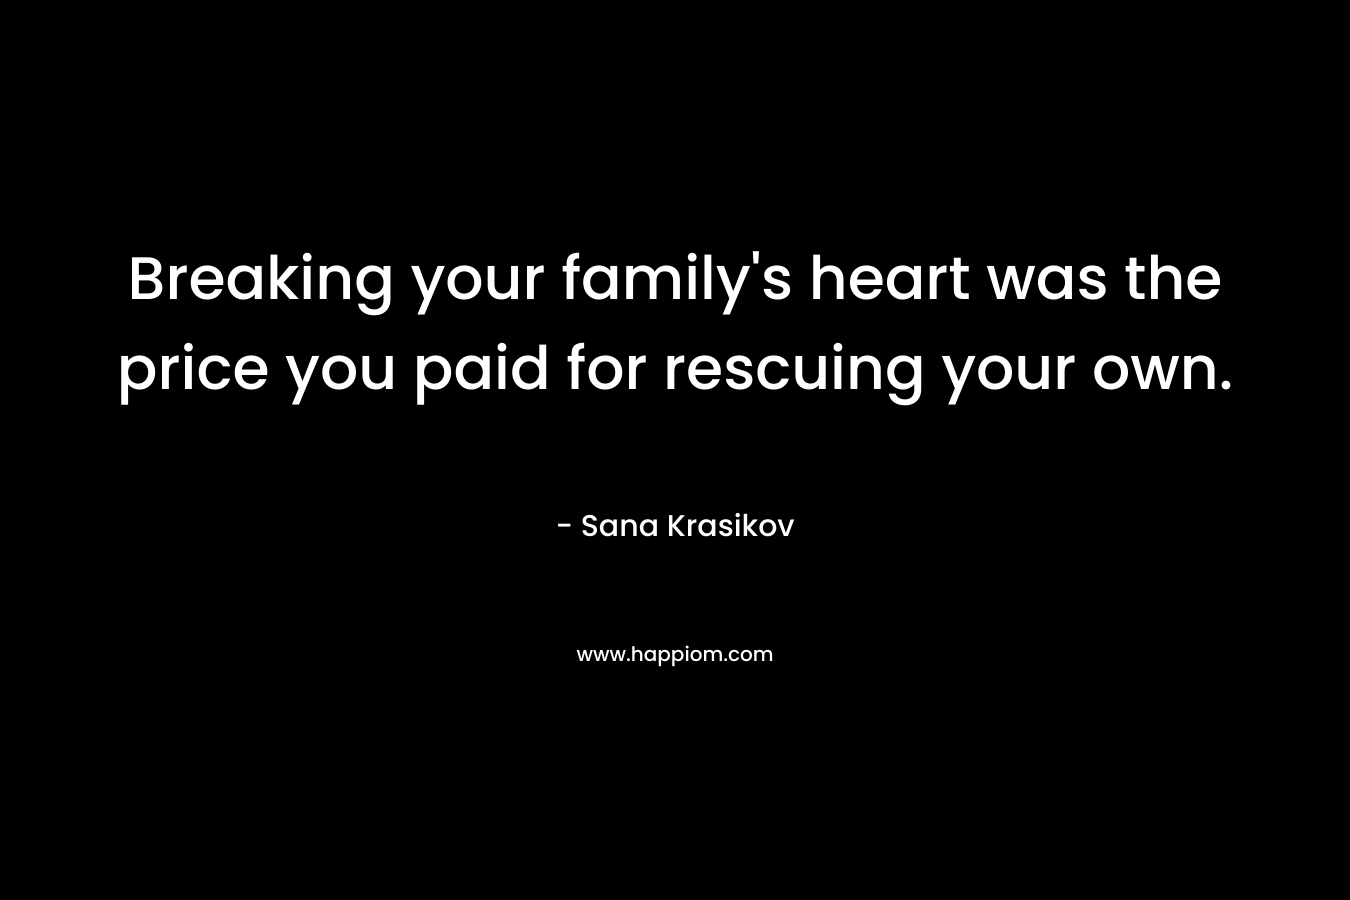 Breaking your family's heart was the price you paid for rescuing your own.